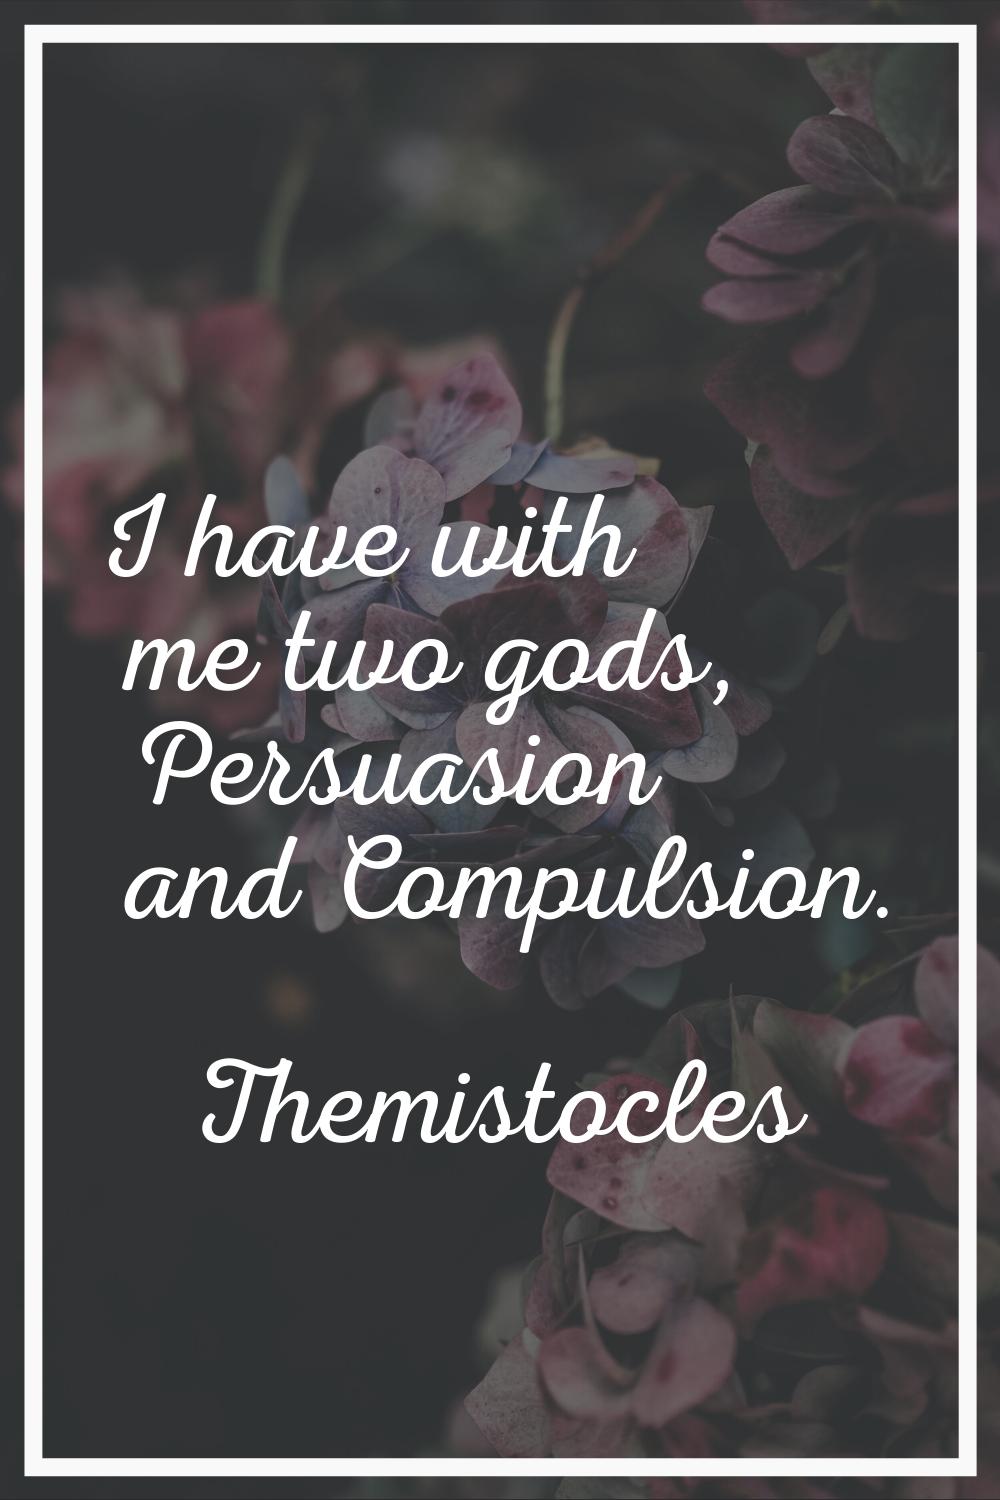 I have with me two gods, Persuasion and Compulsion.